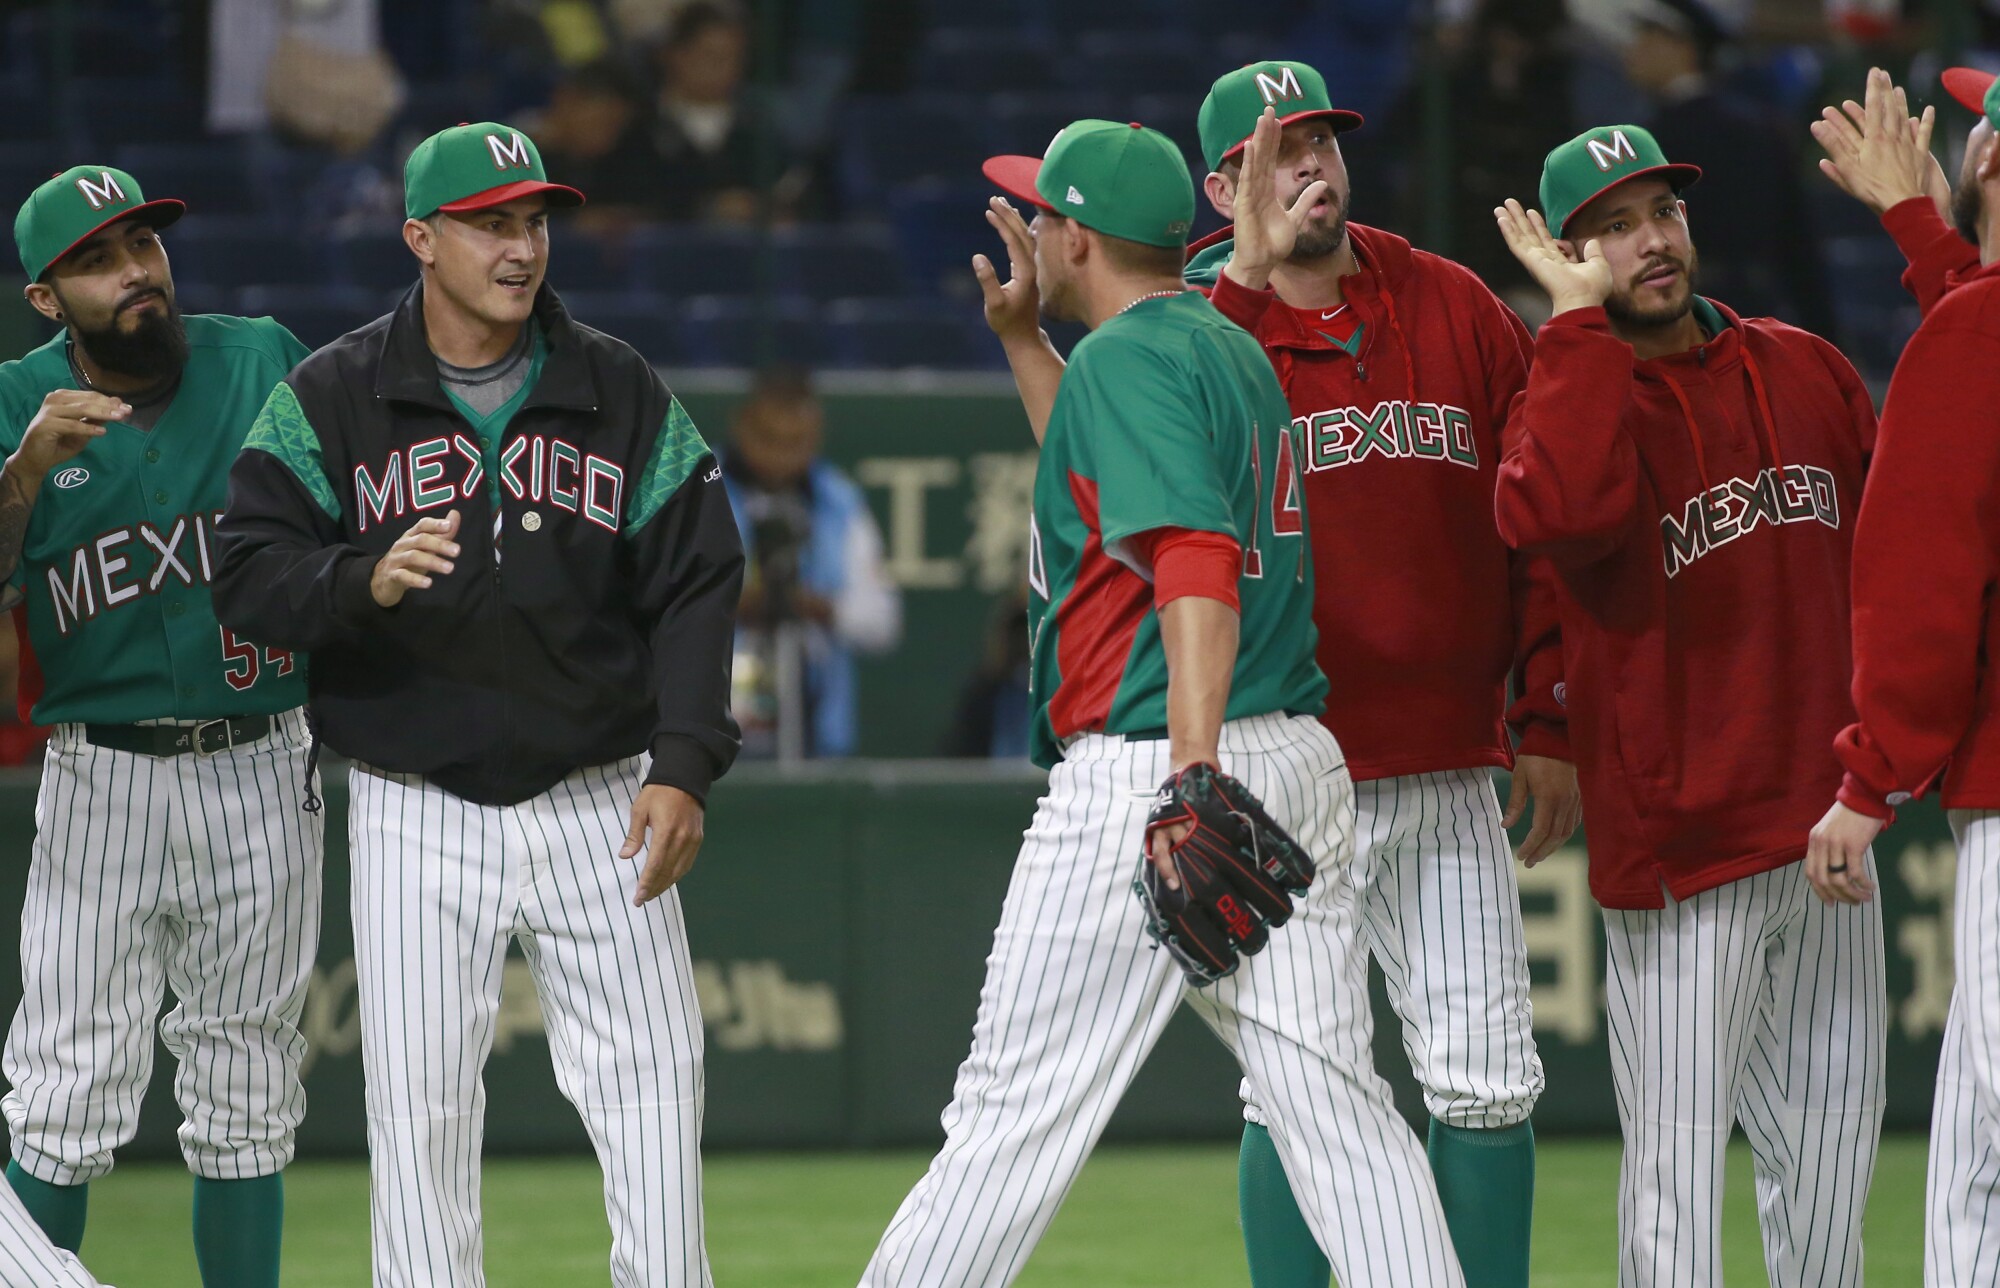 Mexico’s manager Edgar González, second from left, celebrates with his team after a win over Japan in 2016